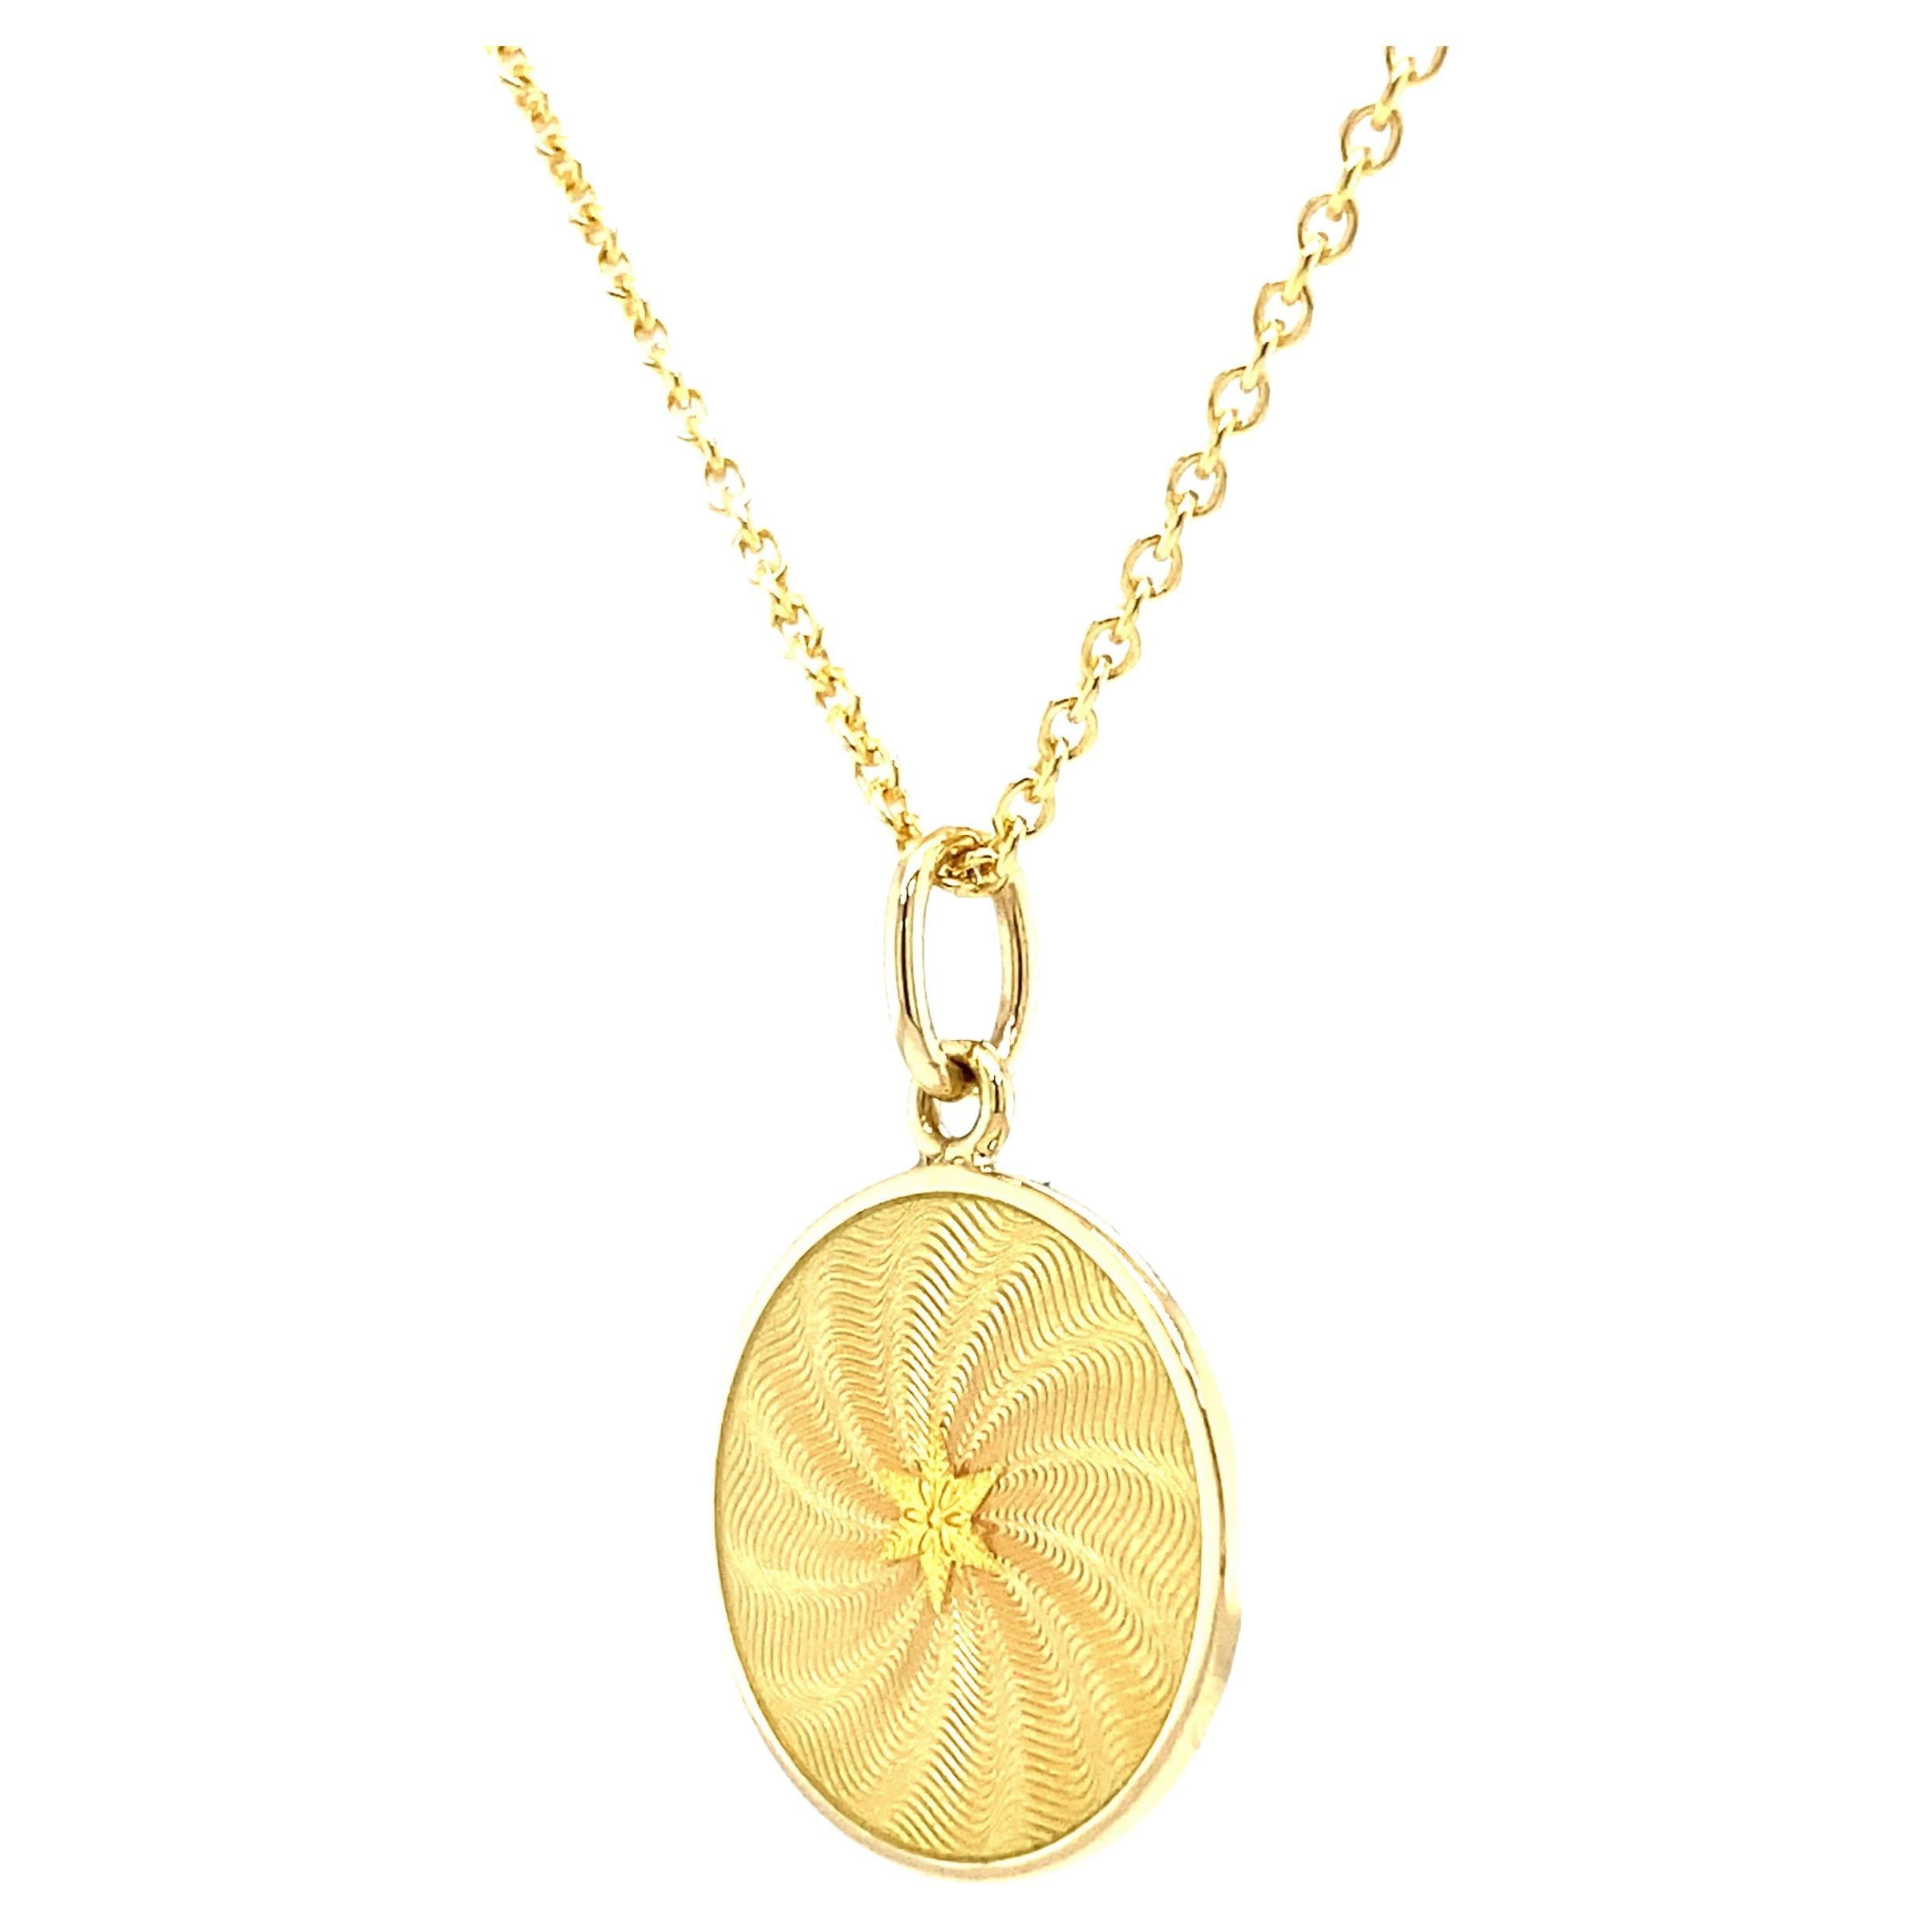 Victor Mayer round pendant necklace with star 18k yellow gold, Diskos Collection, yellow vitreous guilloche enamel with ornamental paillons in the shape of a six-rayed star, diameter app. 15.0 mm

About the creator Victor Mayer
Victor Mayer is